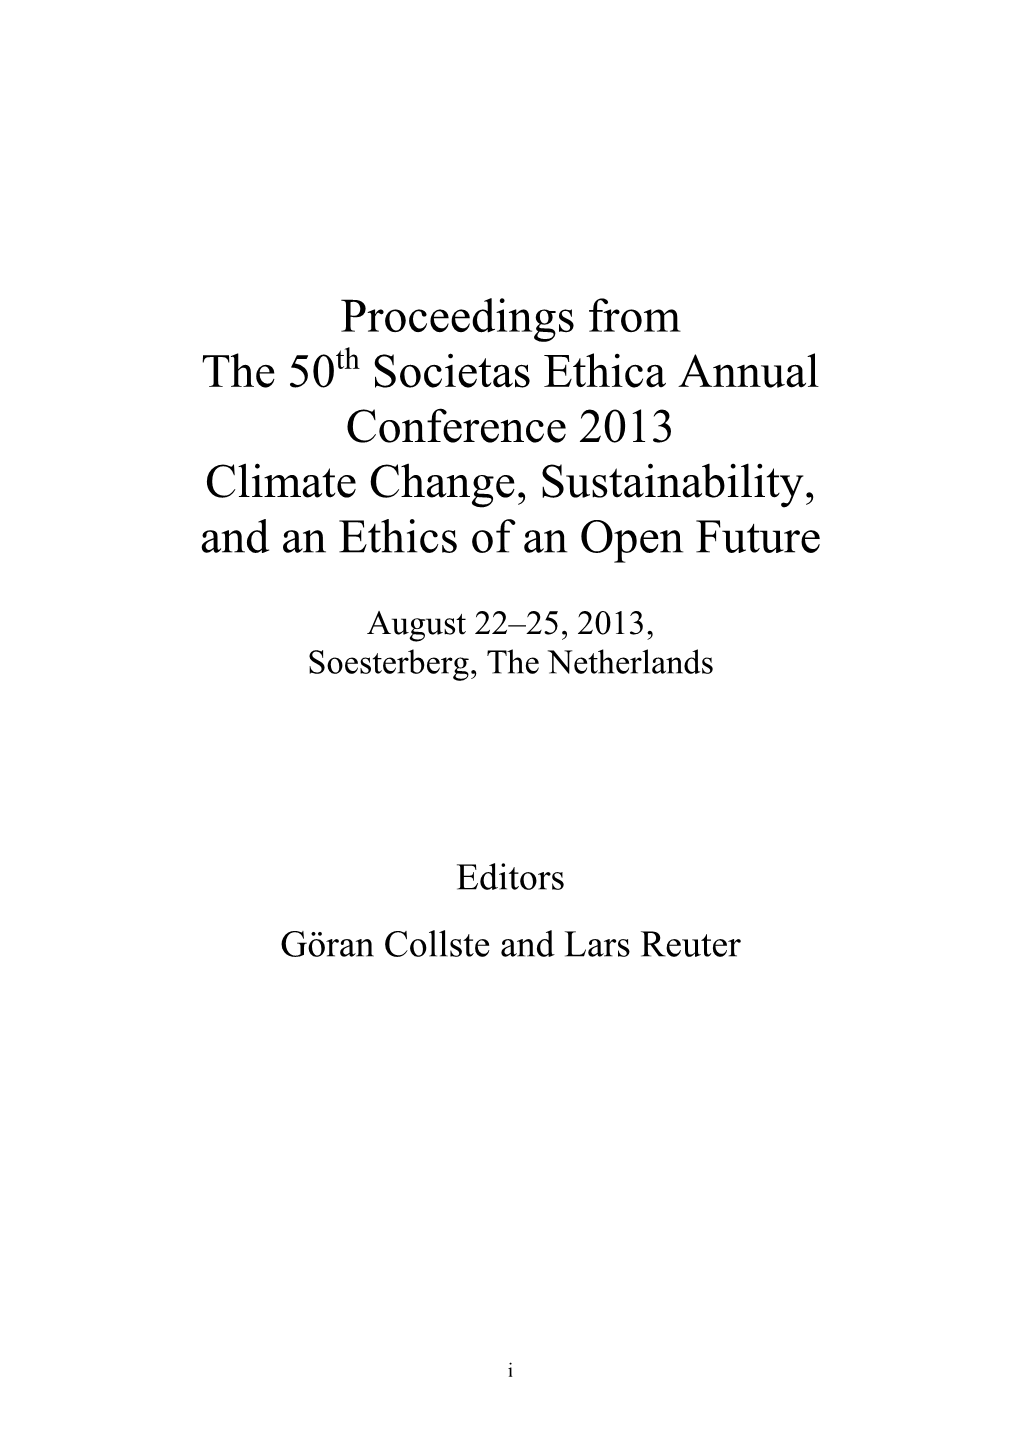 Proceedings from the 50Th Societas Ethica Annual Conference 2013 Climate Change, Sustainability, and an Ethics of an Open Future